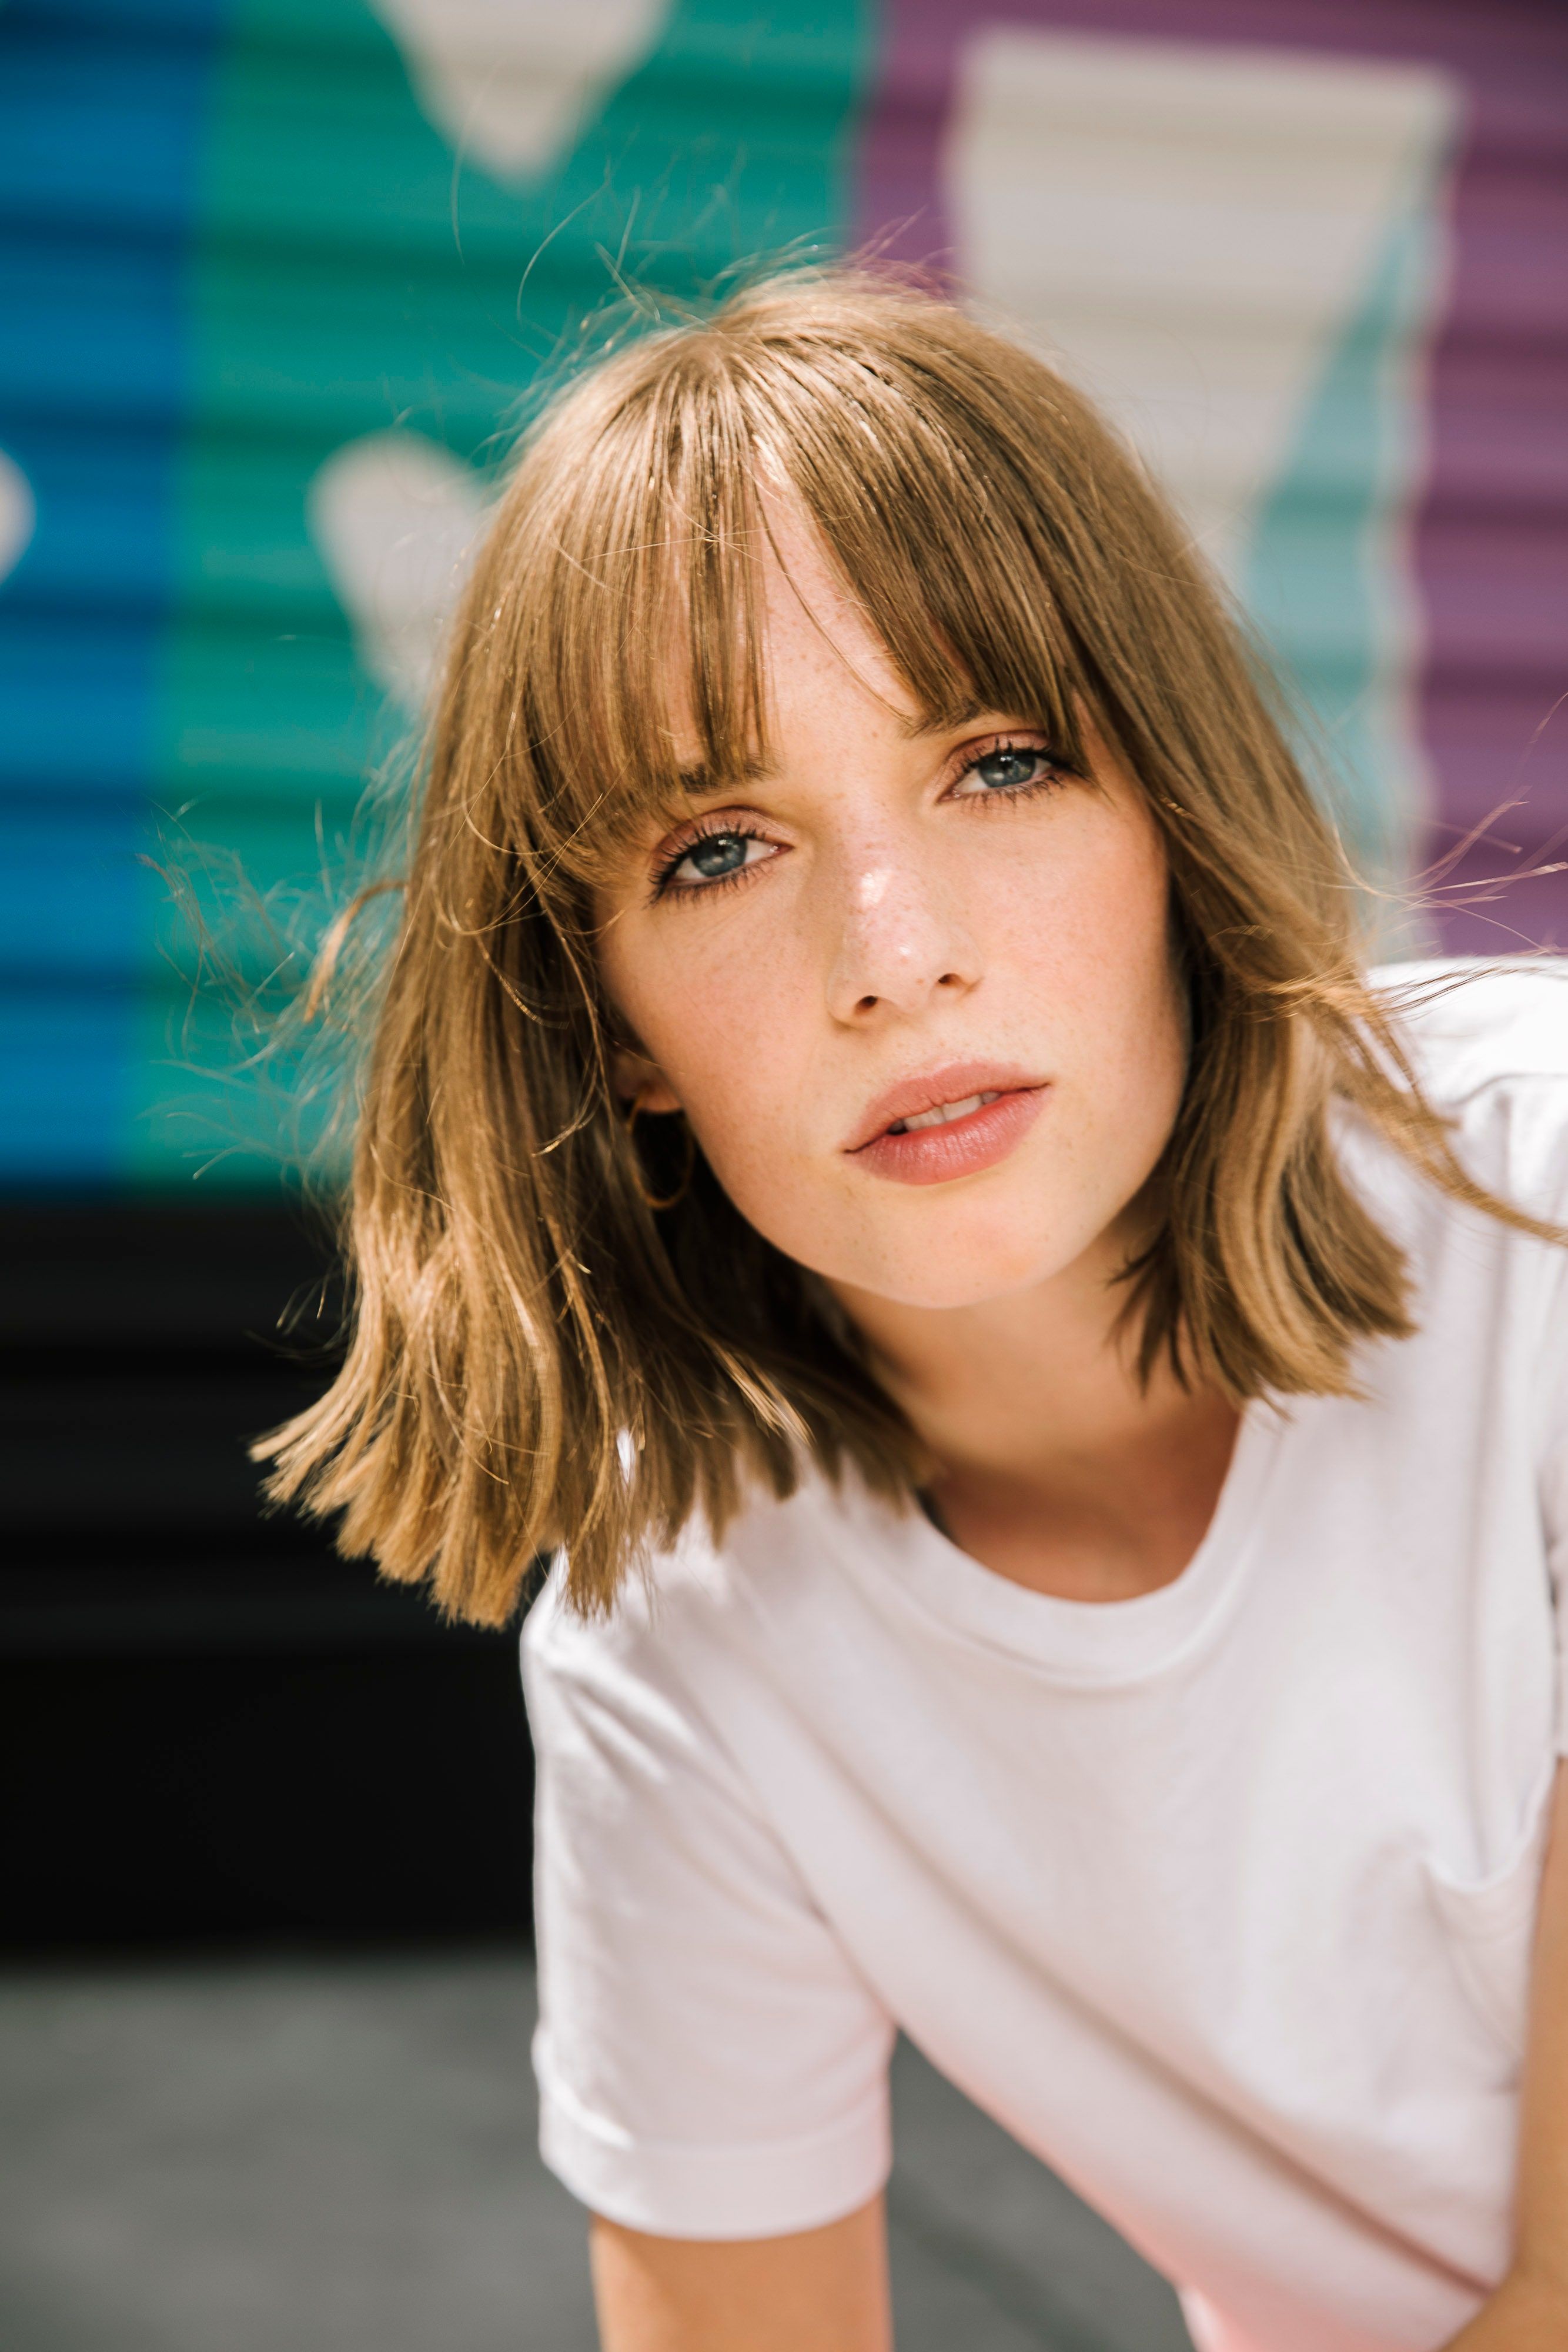 Maya Hawke on the 'Stranger Things' Hype, Fame, and What's Next